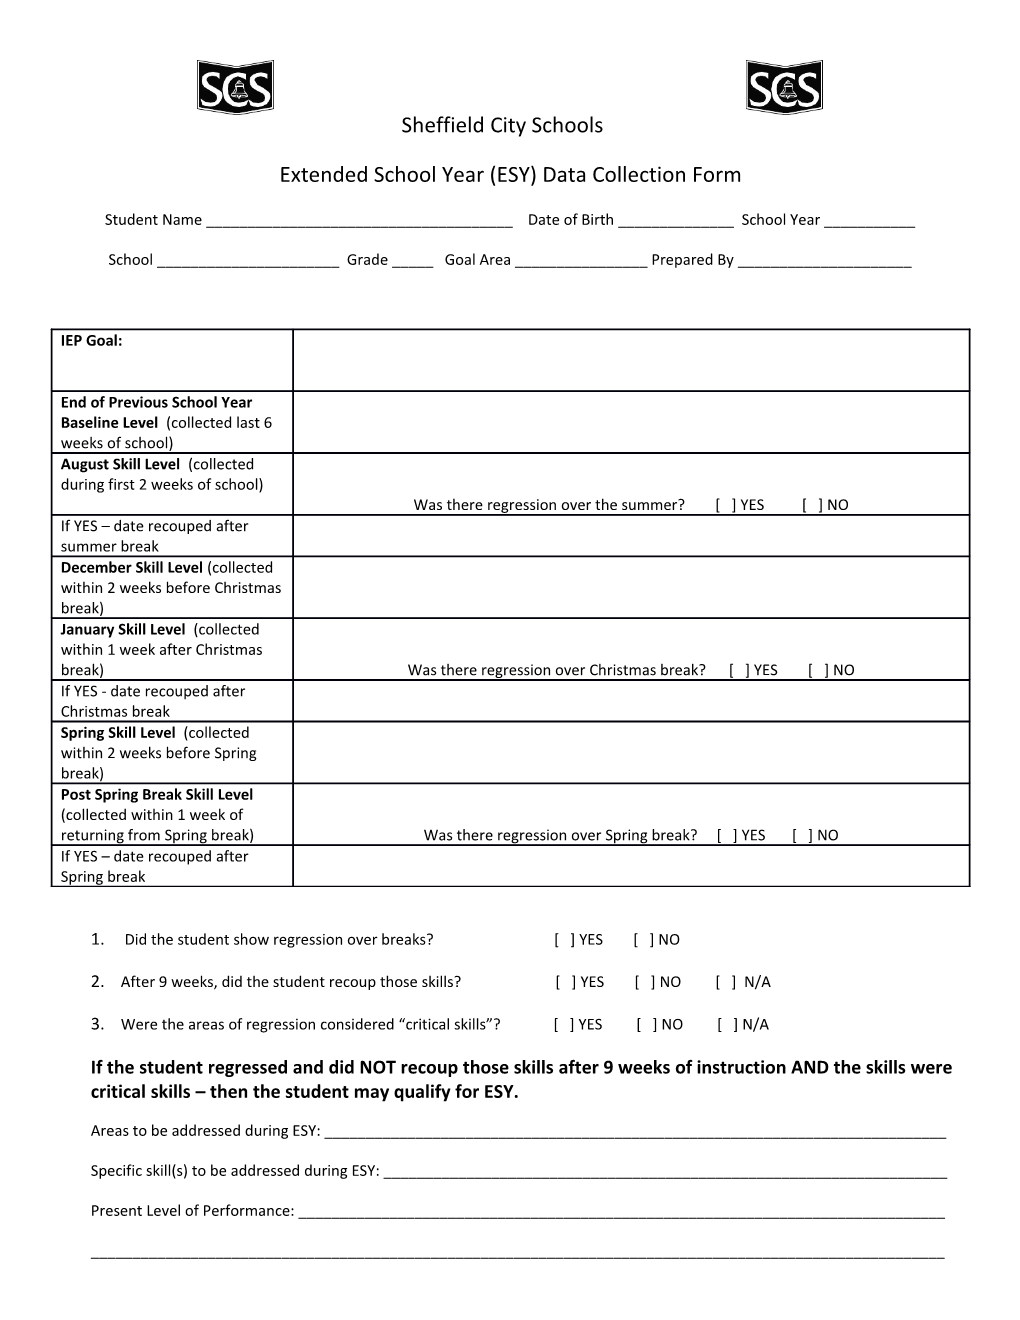 Extended School Year (ESY) Data Collection Form